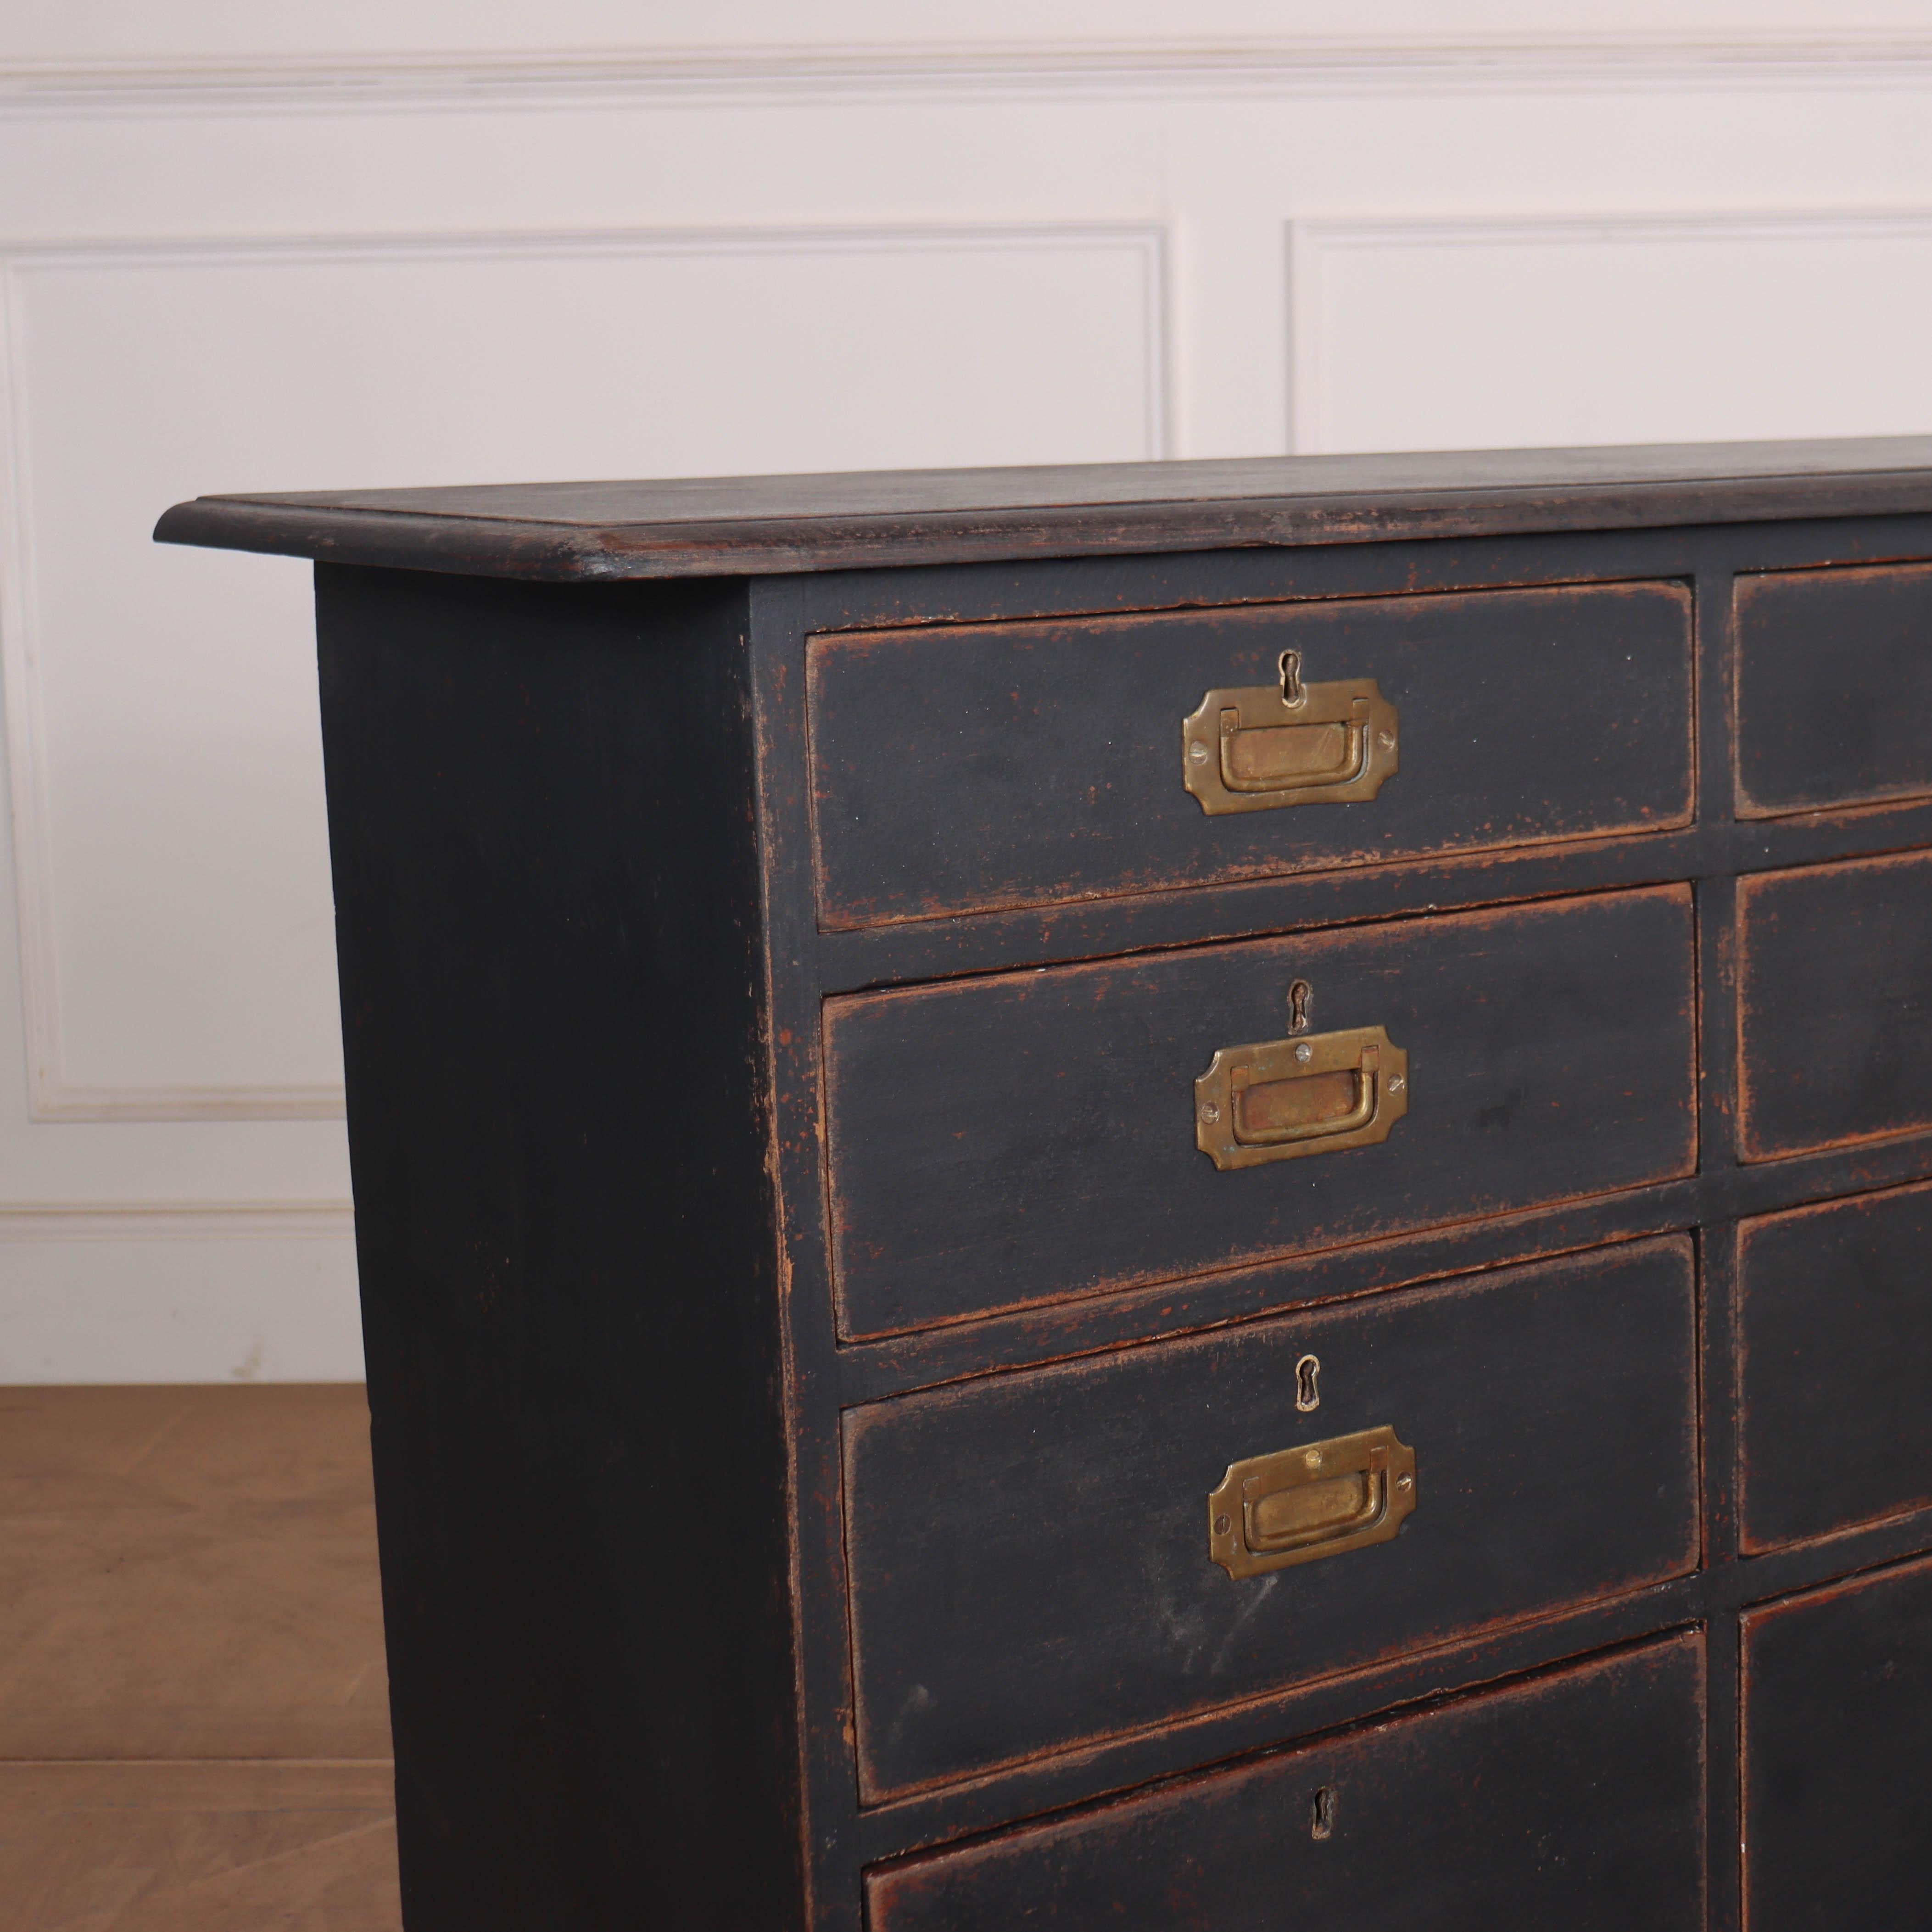 19th century English military style painted pine chest of drawers / dresser base. 1860.

Dimensions
58.5 inches (149 cms) Wide
16 inches (41 cms) Deep
34 inches (86 cms) High.